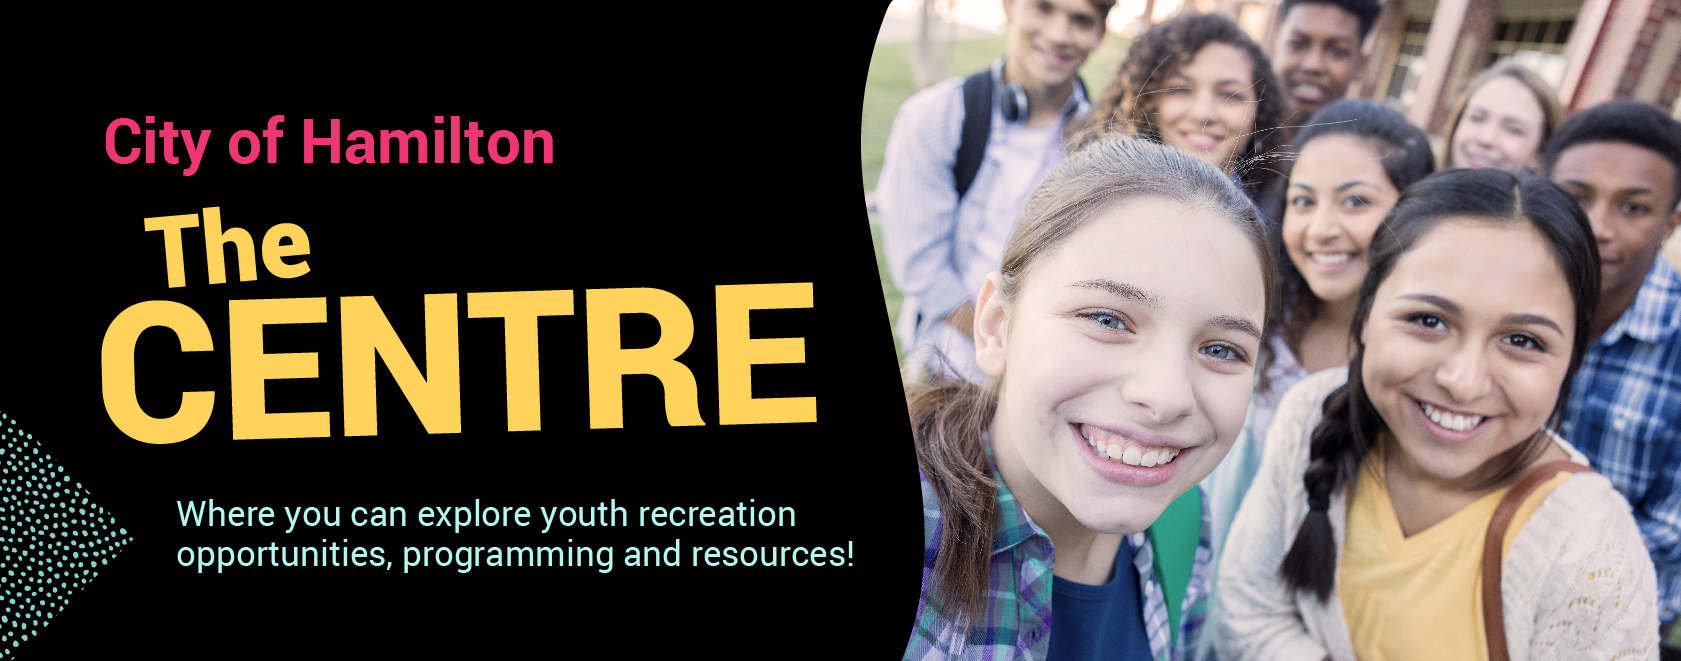 Text: City of Hamilton The Centre. Where you can explore youth recreation opportunities, programming and resources! Selfie photo of a group of teenagers